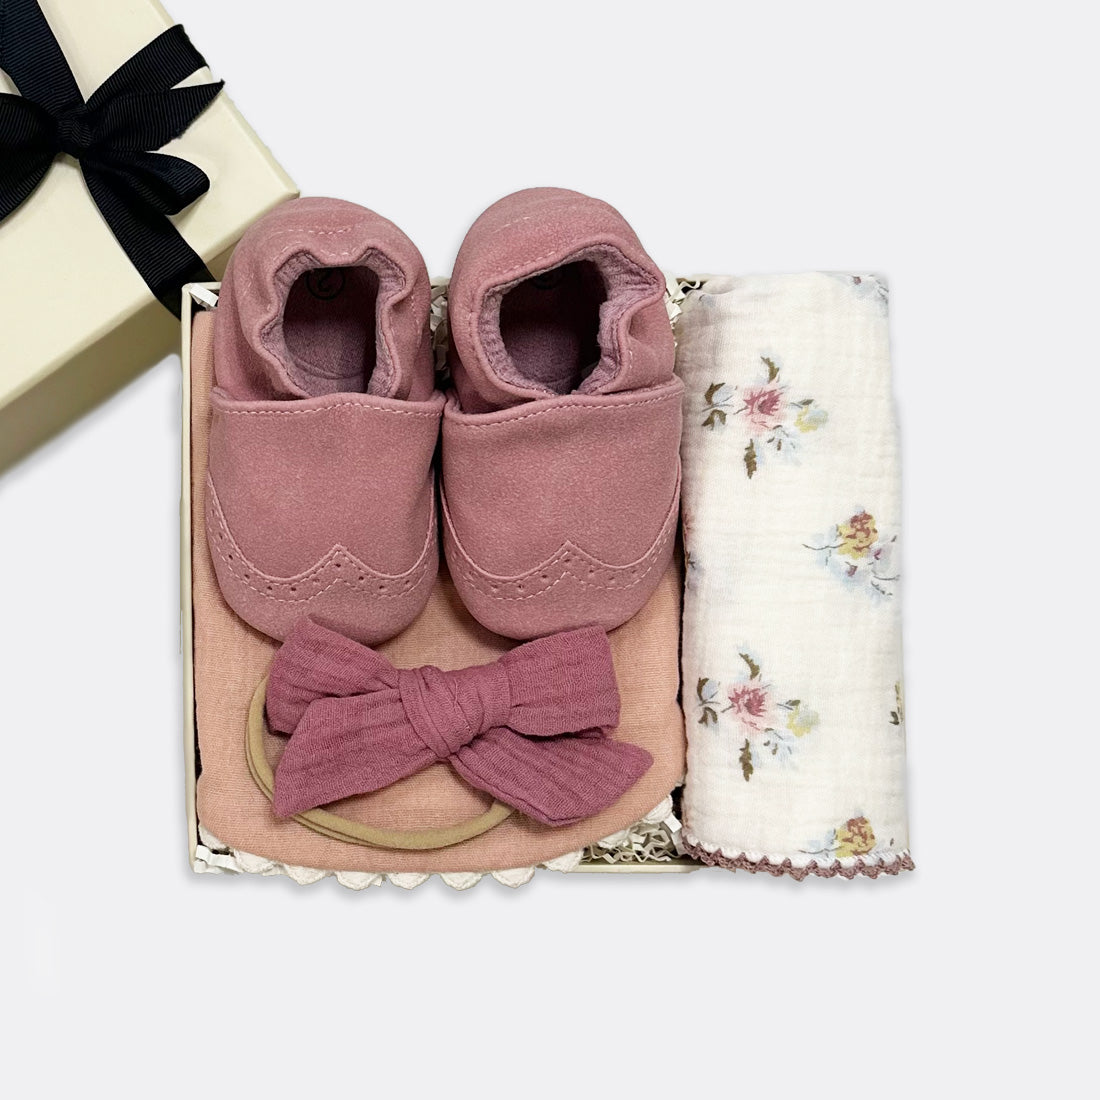 My Moccasin | Rose (from birth up to 12 months) Scallop Bib | Bois de Rose Double-sided Baby Headband- Pink Rose Cottage Chic Muslin Square, shop the best Christmas gift gifts for her for him from Inna carton online store dubai, UAE!